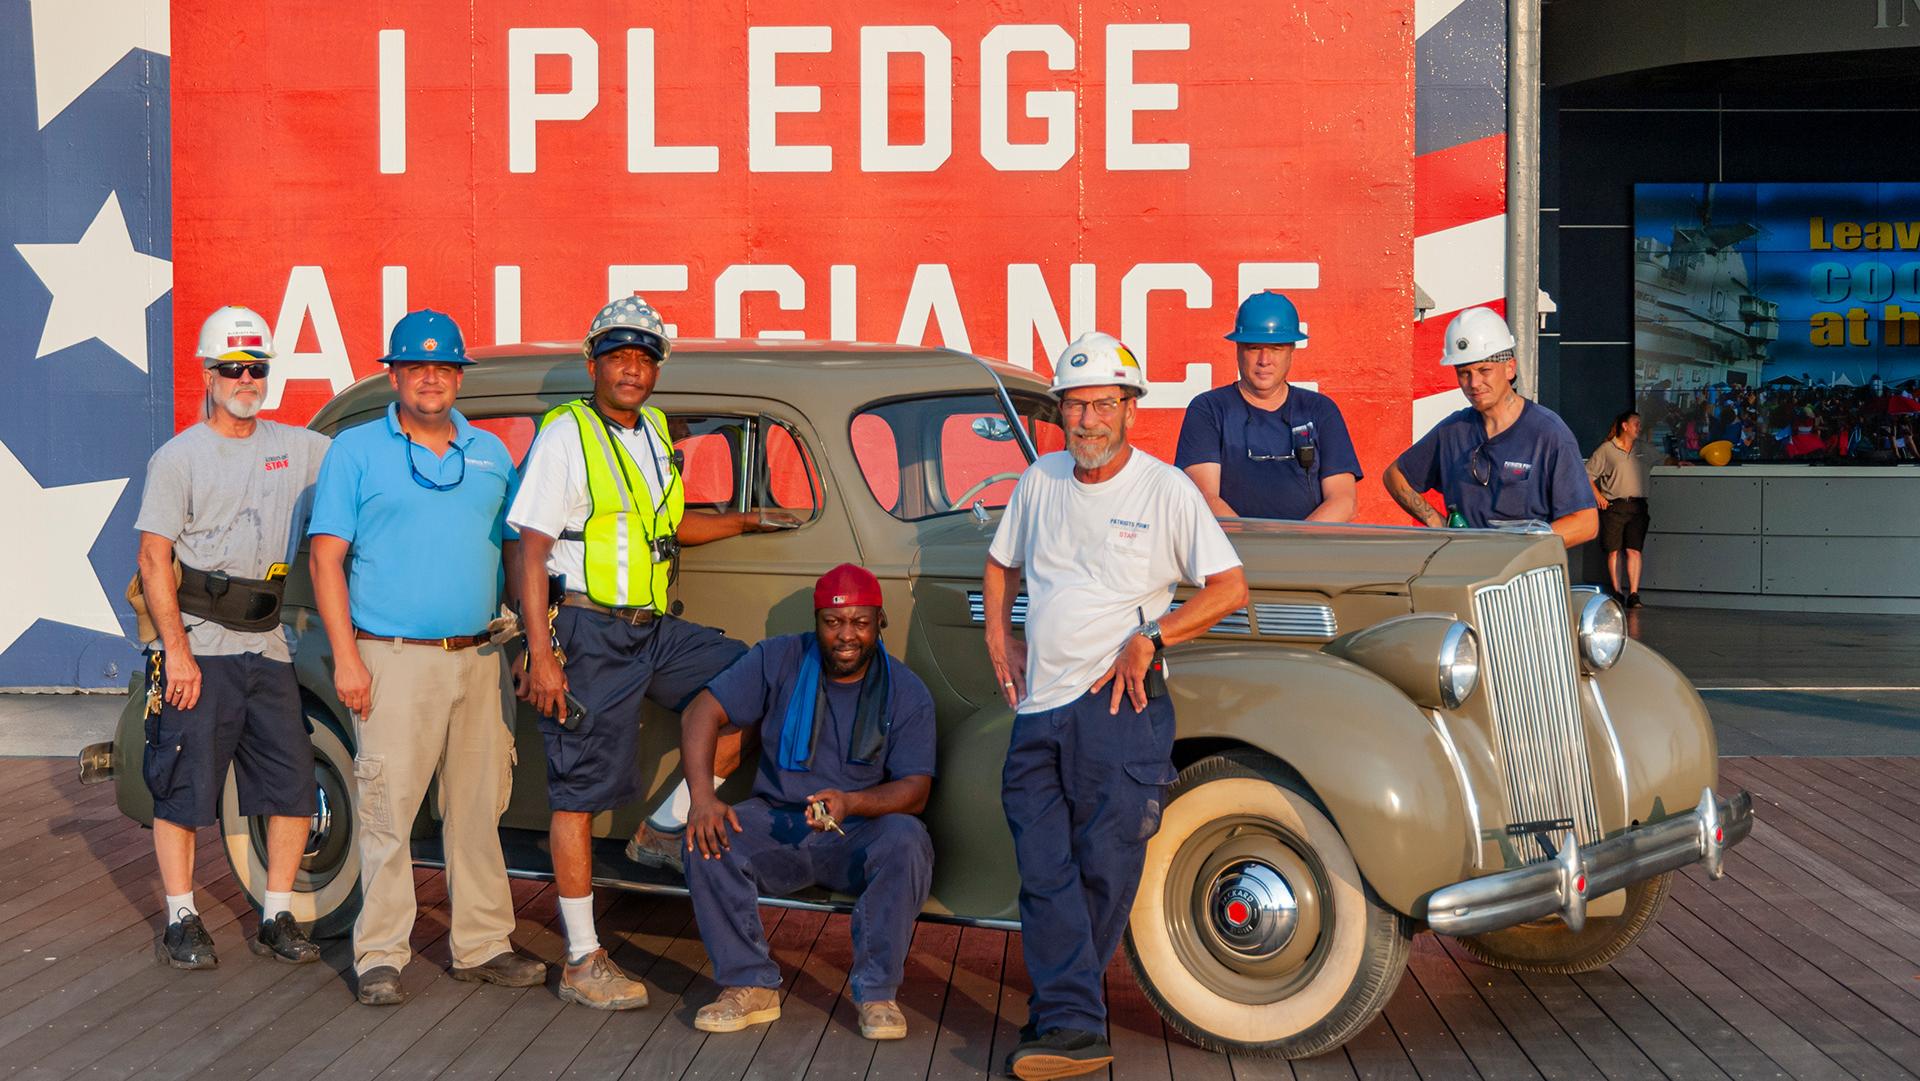 Seven individual in hard hats stand around an older car